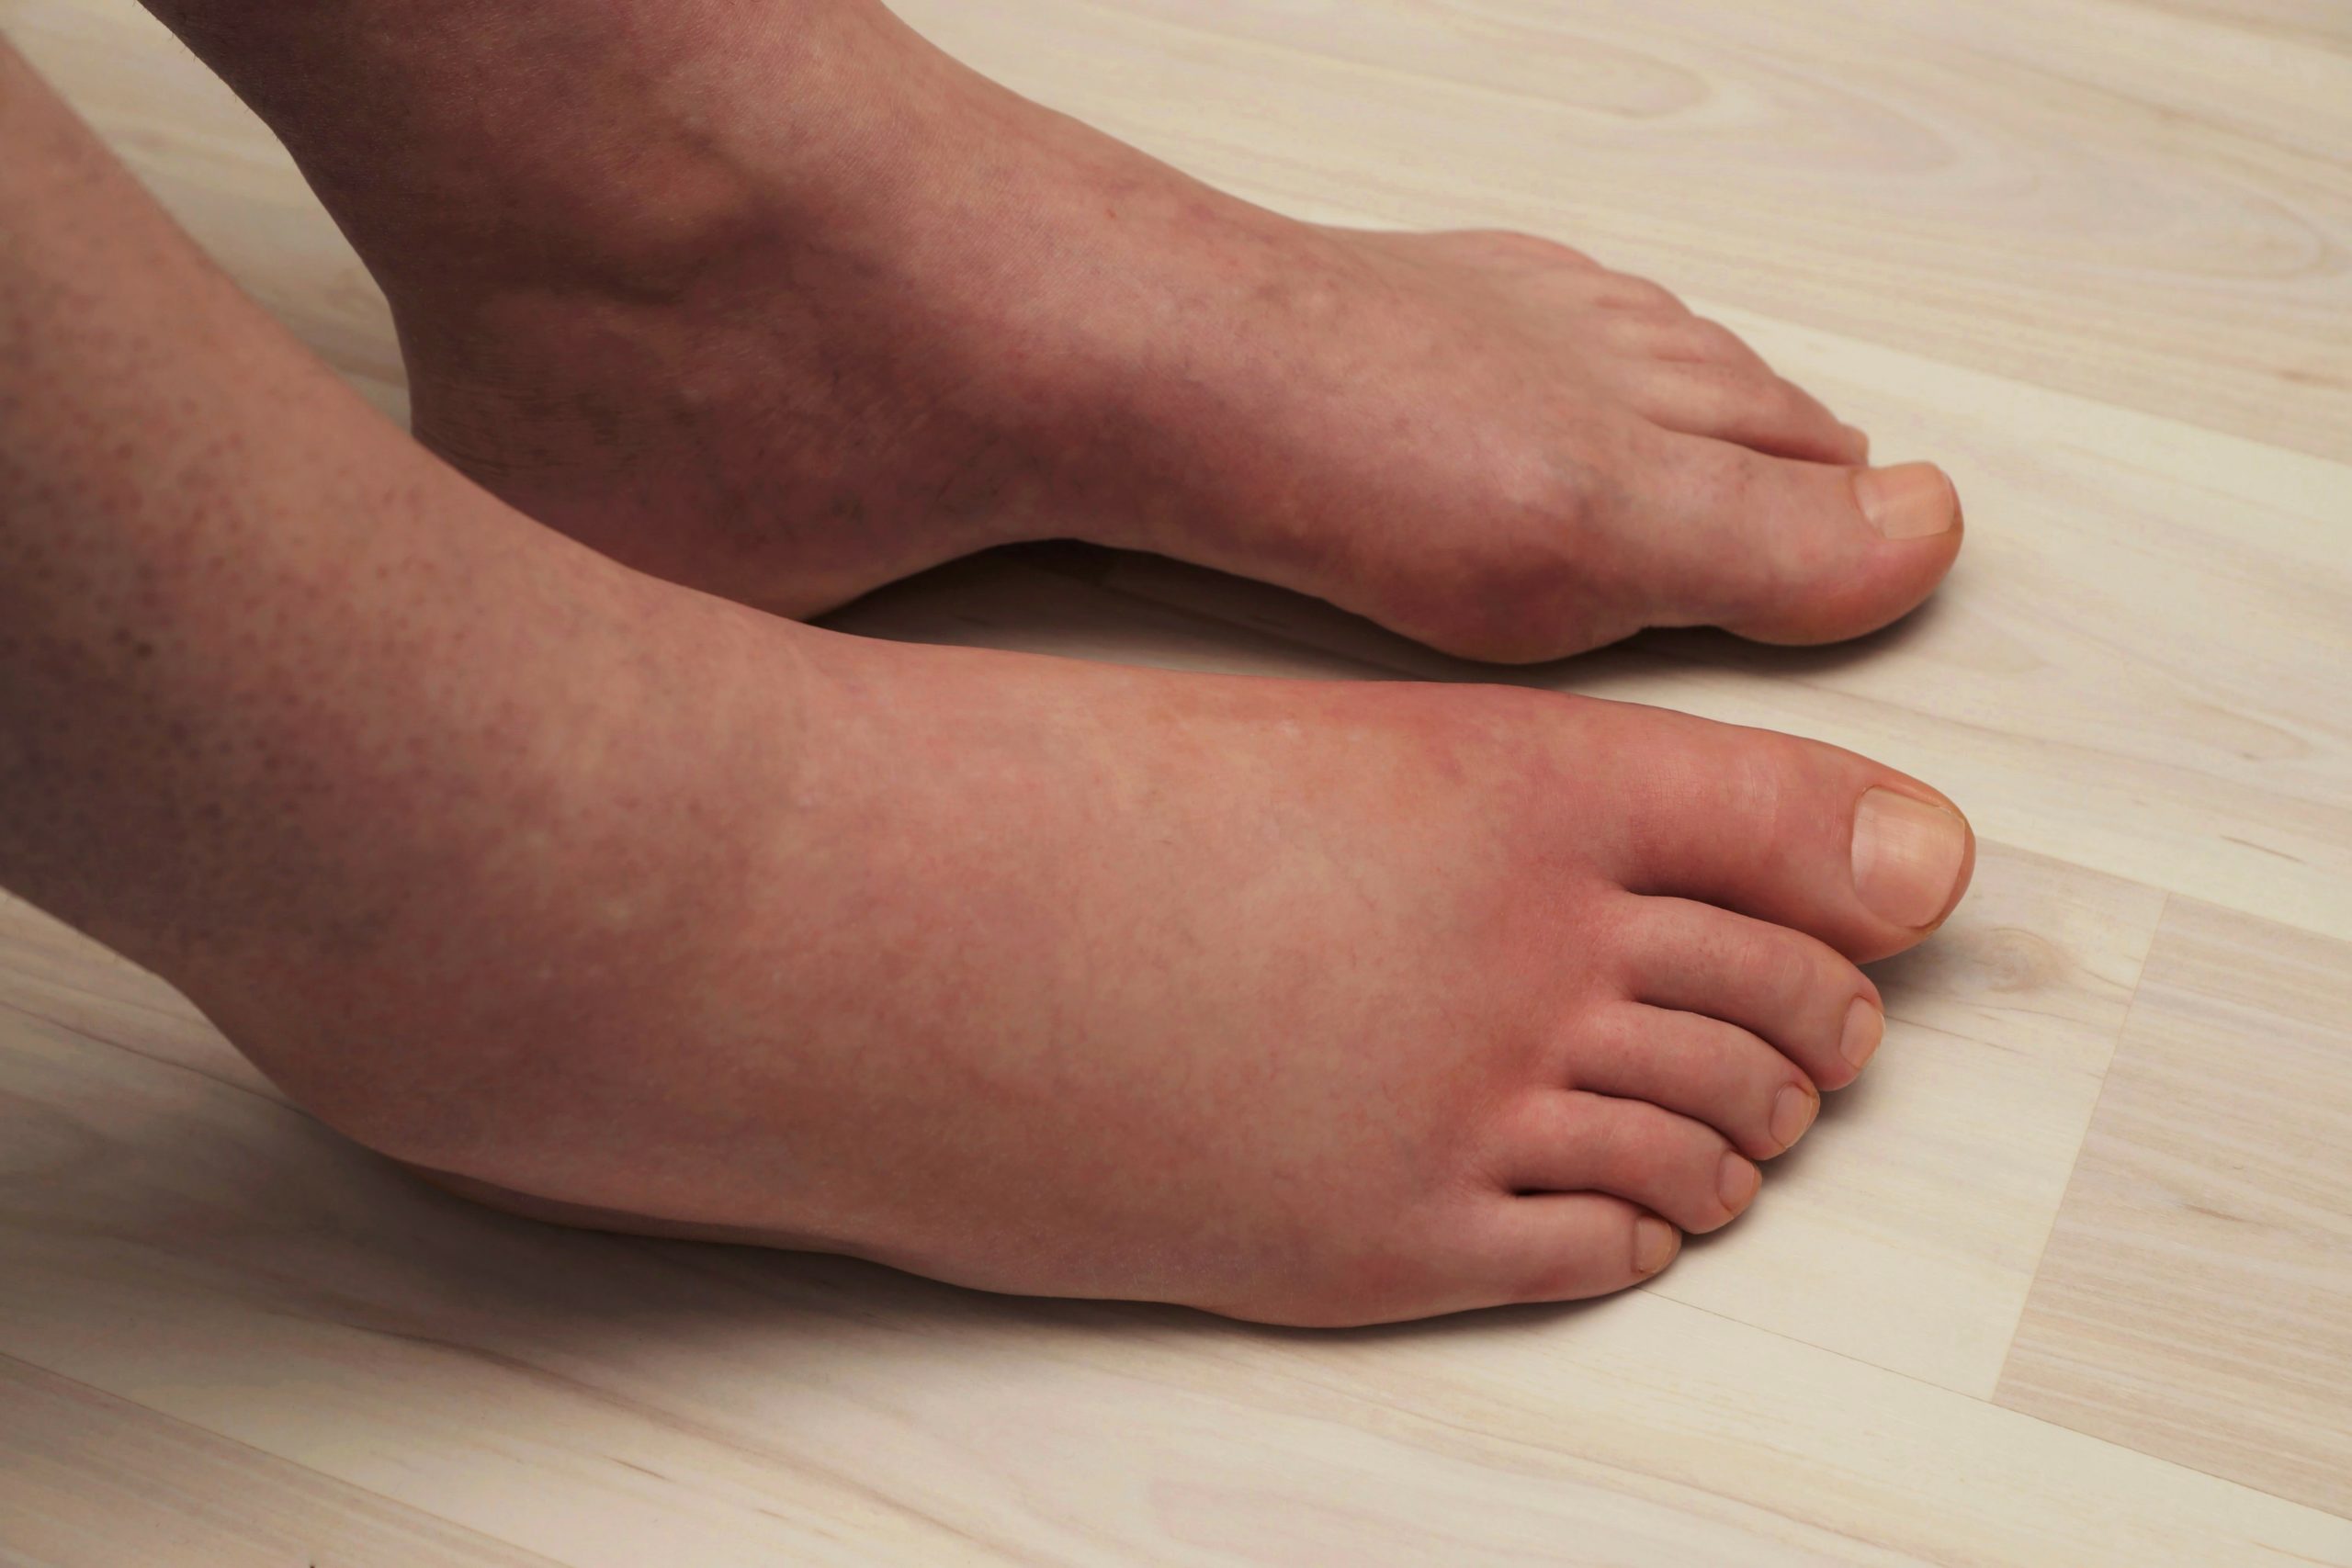 Leg Swelling: Causes and Dangers